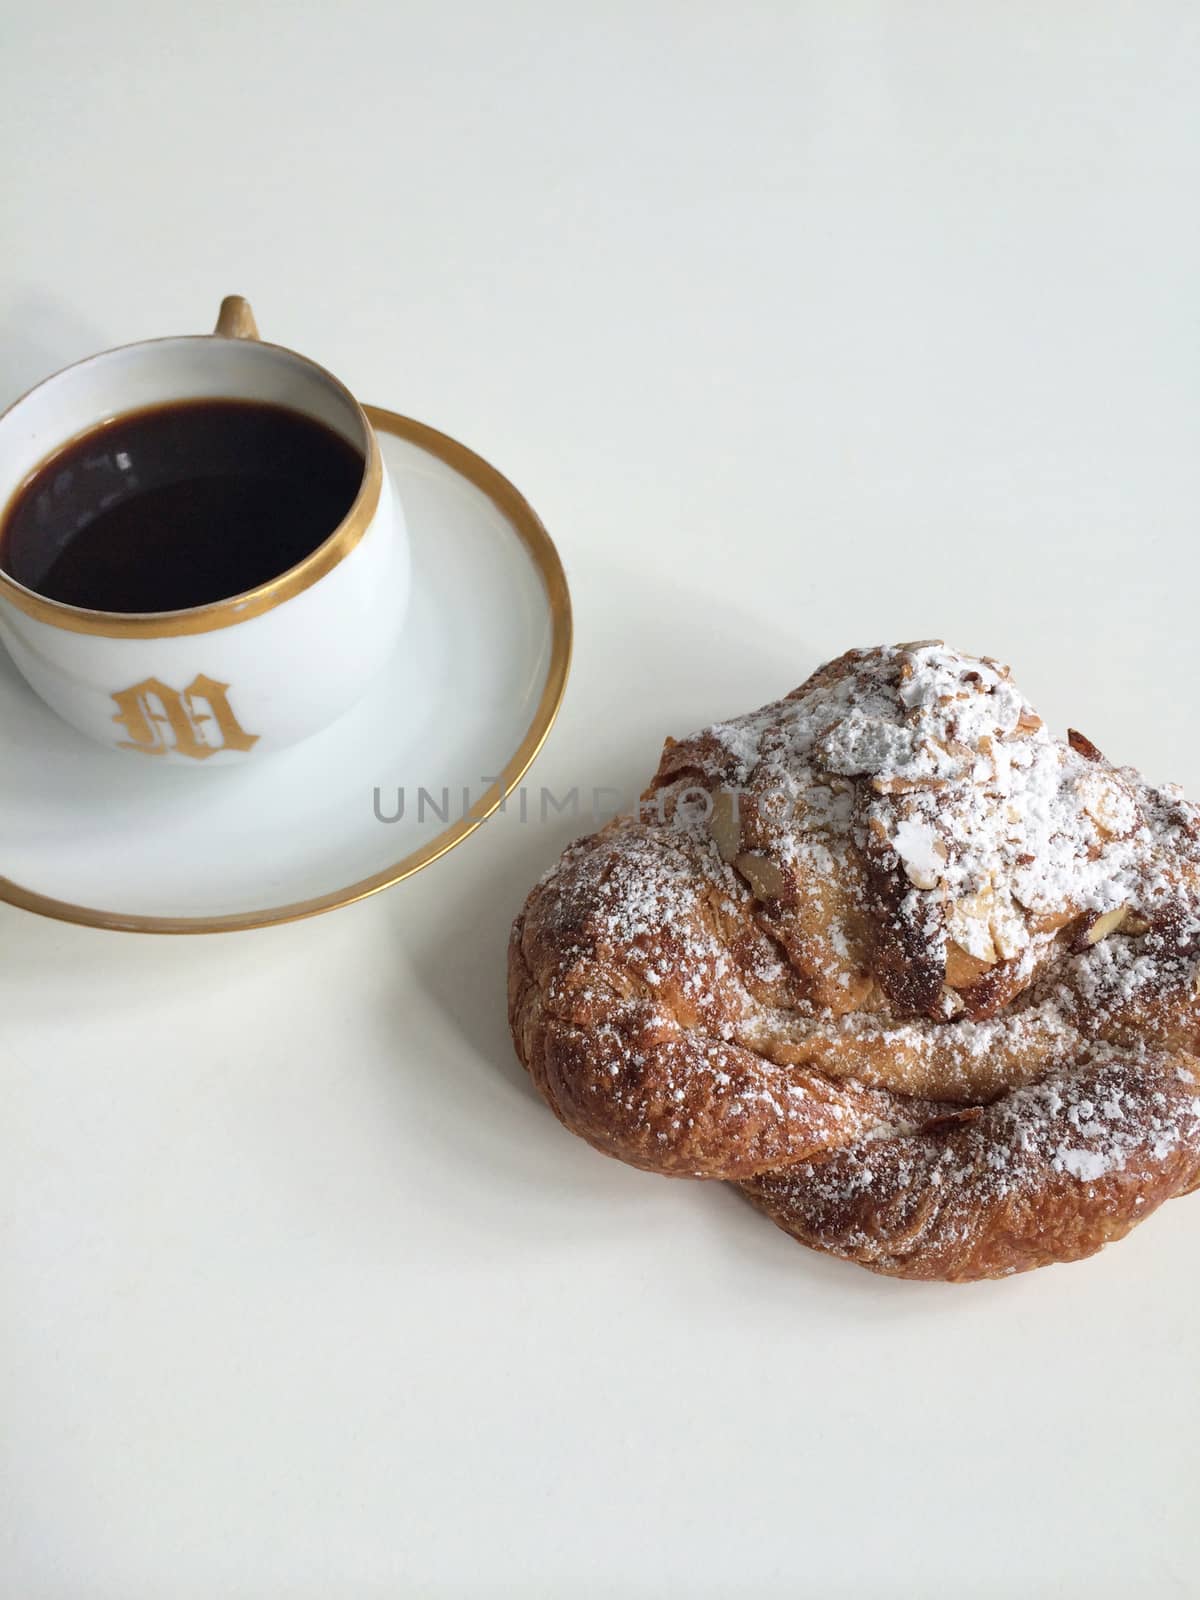 Amond croissant and black coffee in a white and gold mug with the letter M